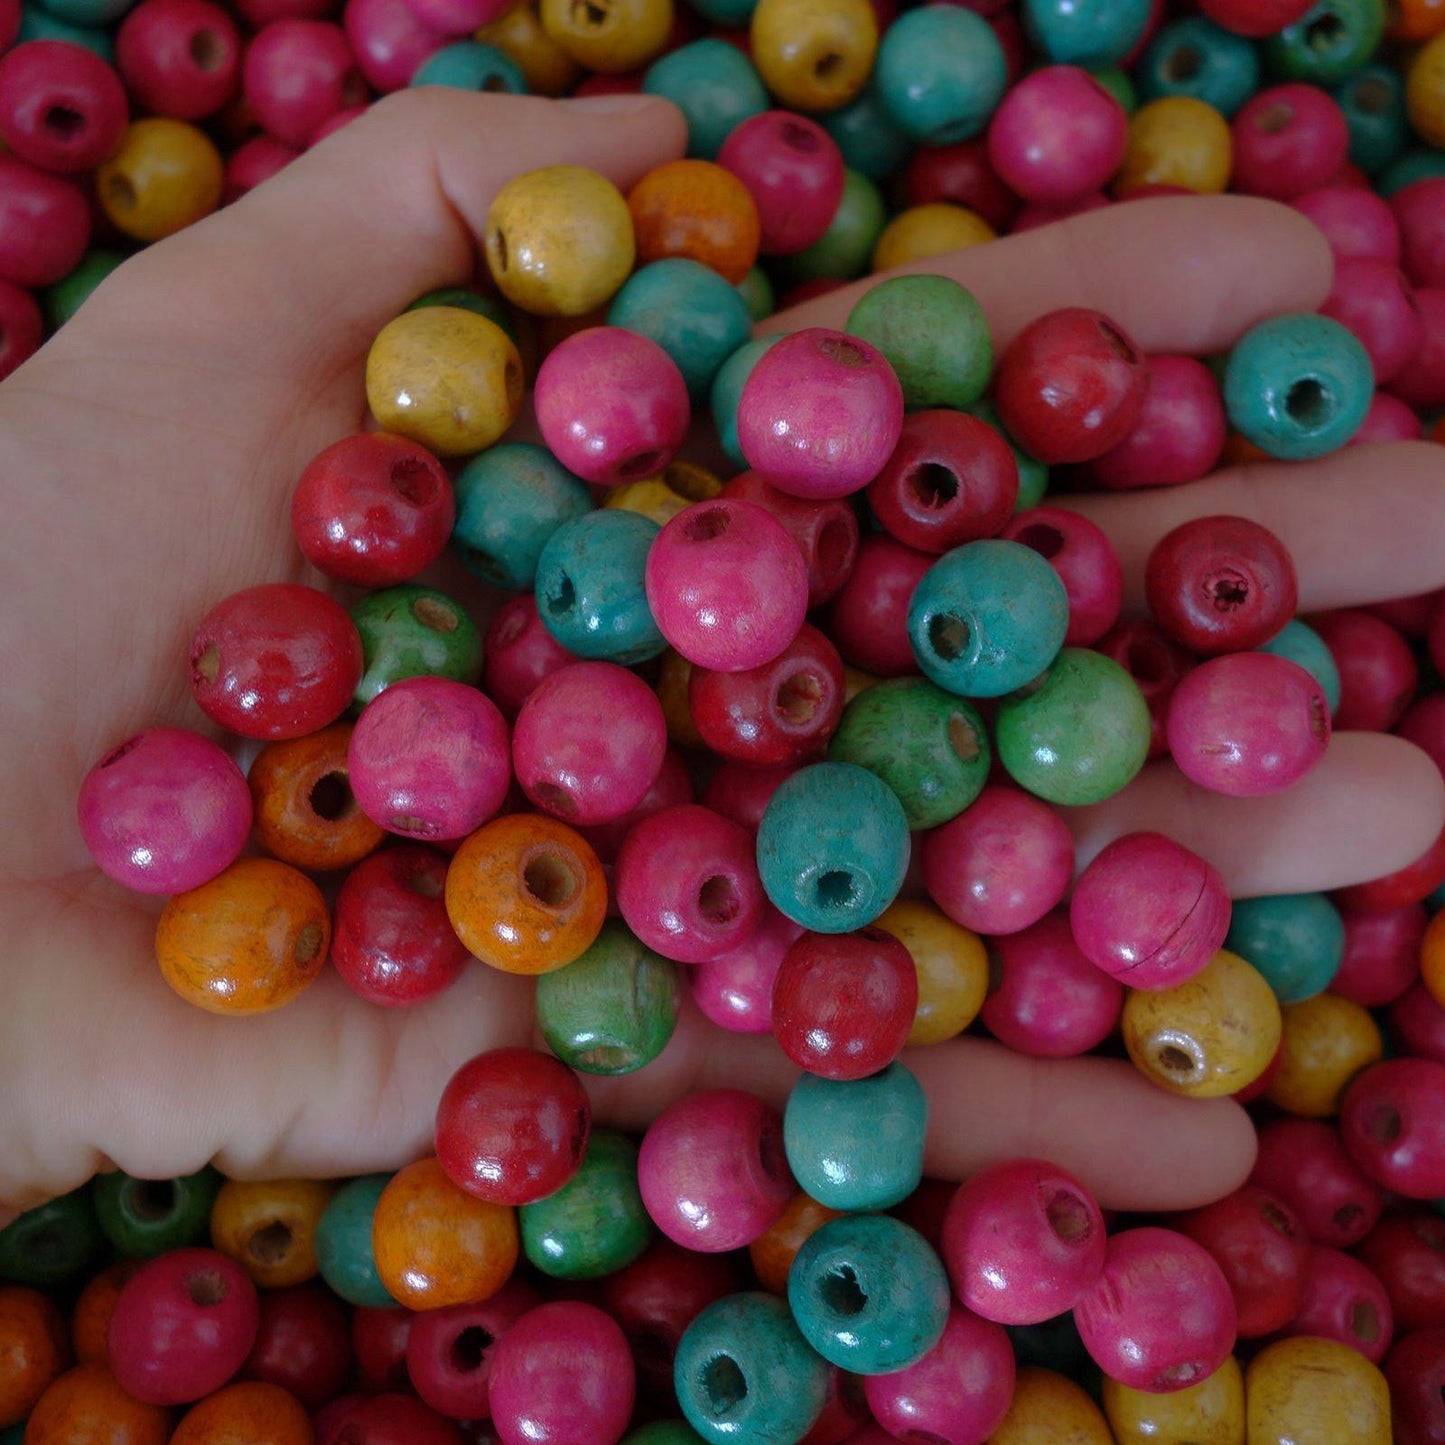 Round Wooden Beads for Jewellery Making Crafts Wood Wristbands Necklaces Chains